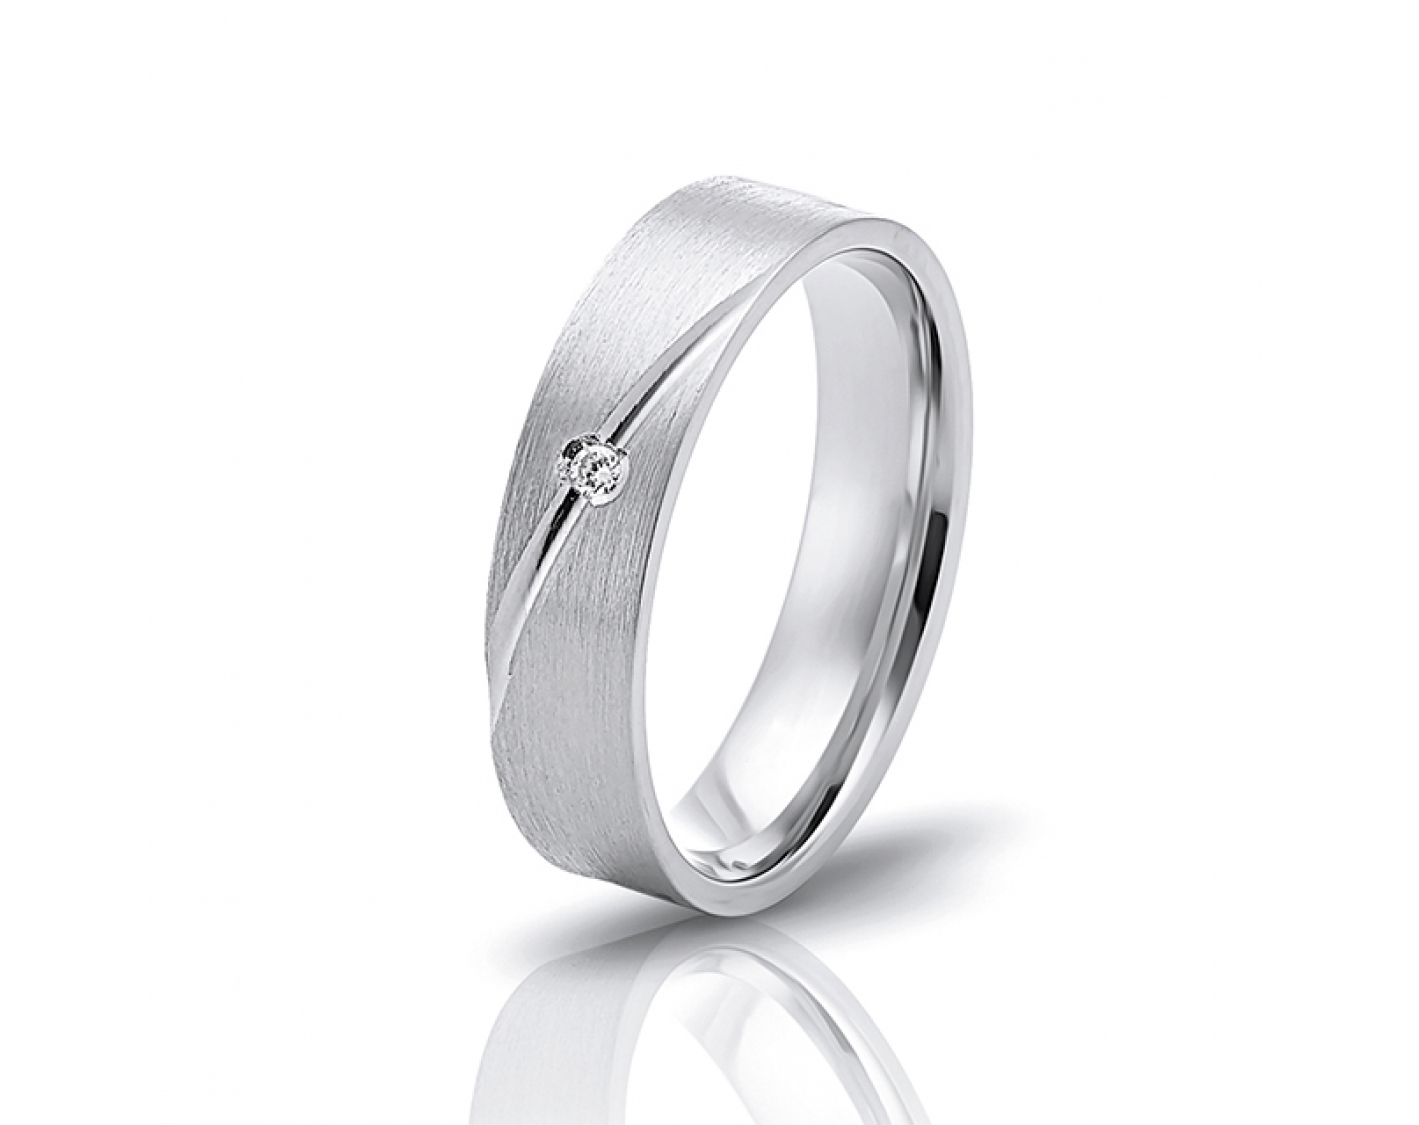 18k white gold 5mm matte wedding band with diagonal line and a diamond